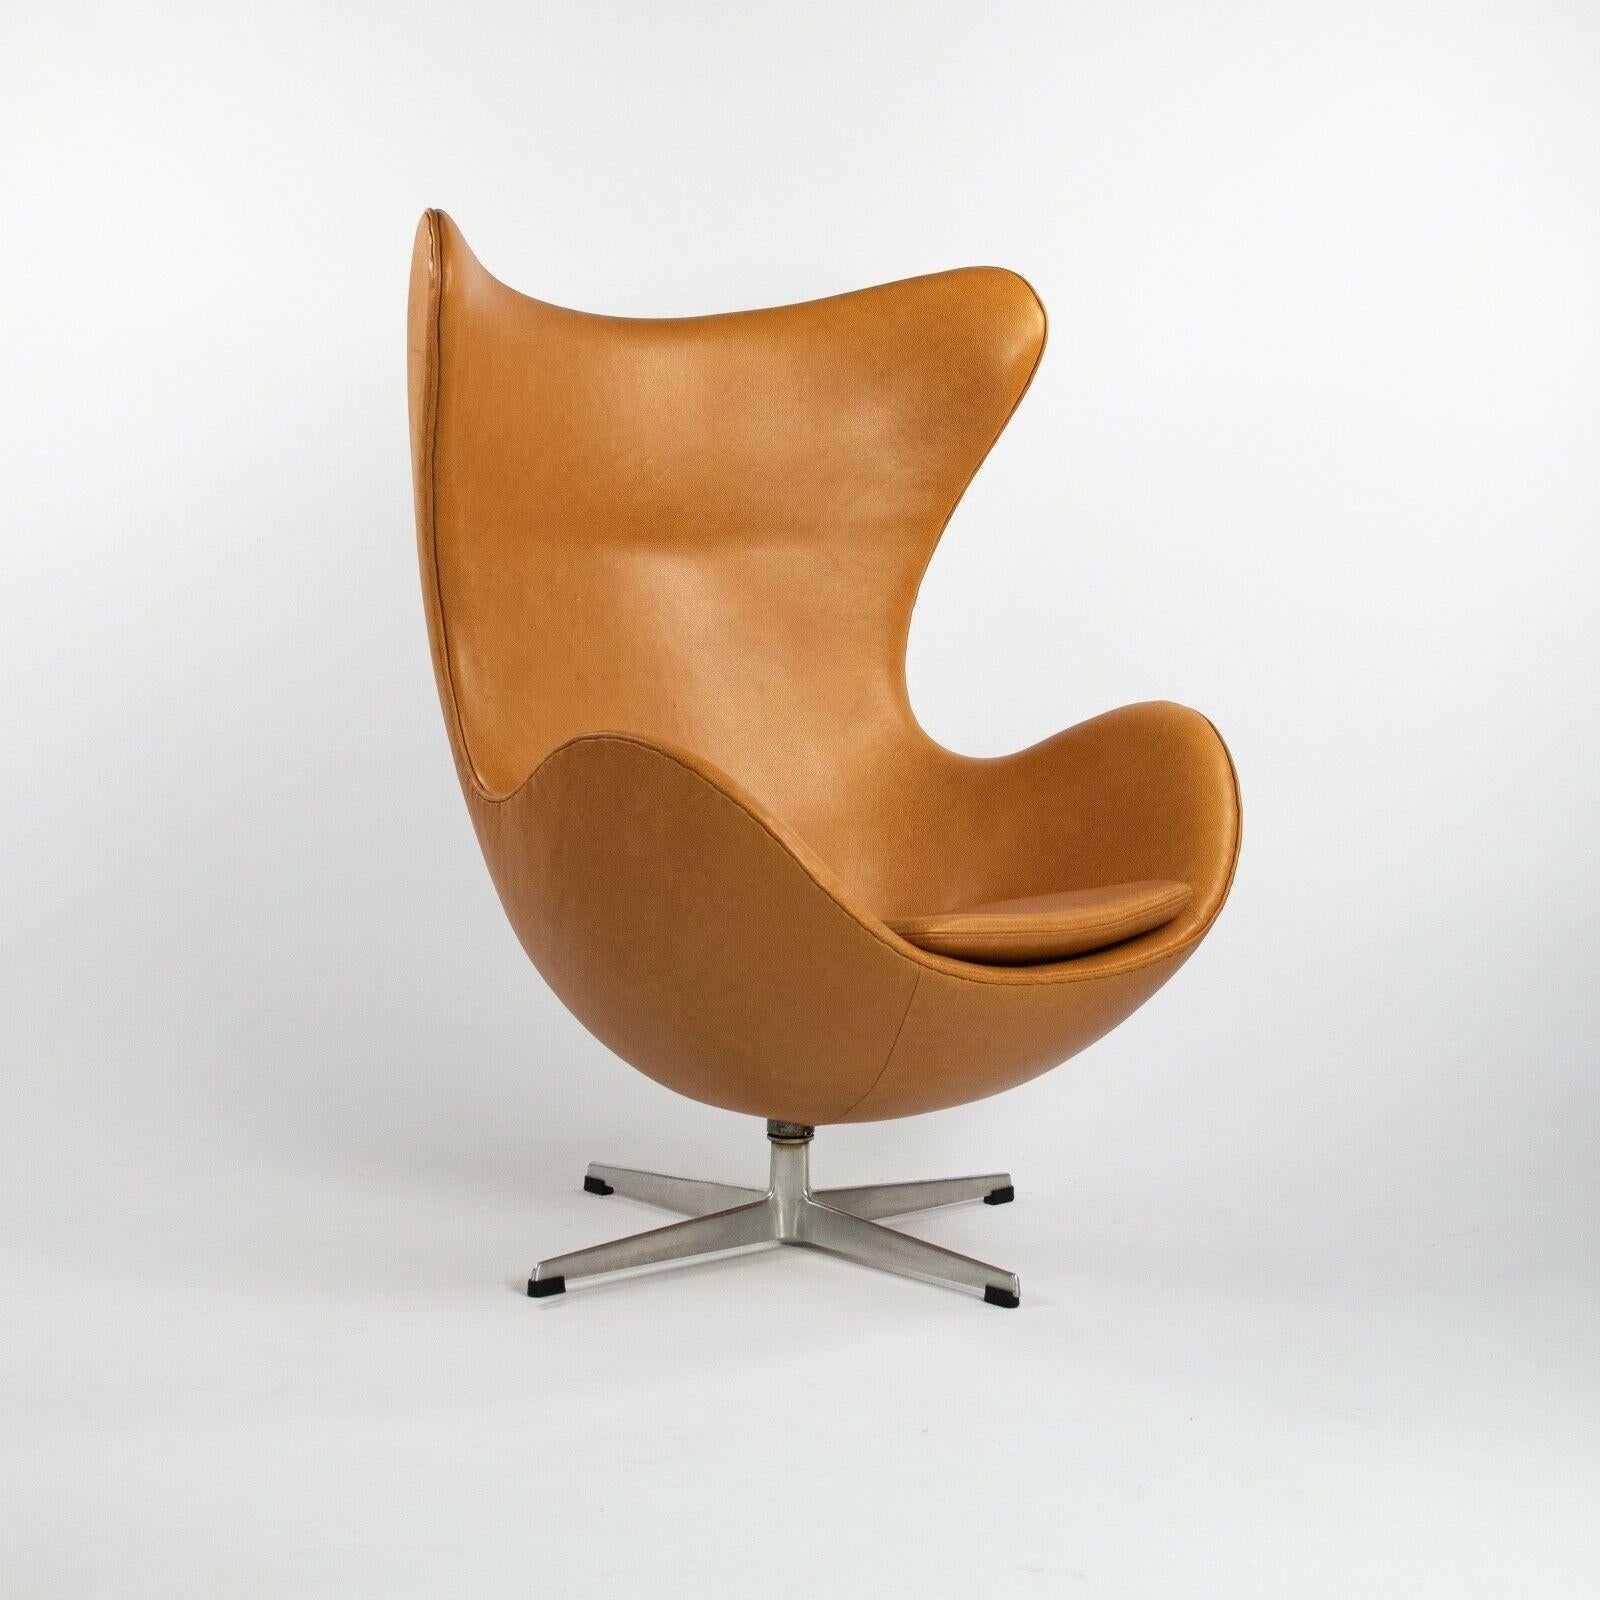 Mid-20th Century 1959 Arne Jacobsen for Fritz Hansen Egg Chair & Ottoman in Tan / Cognac Leather For Sale